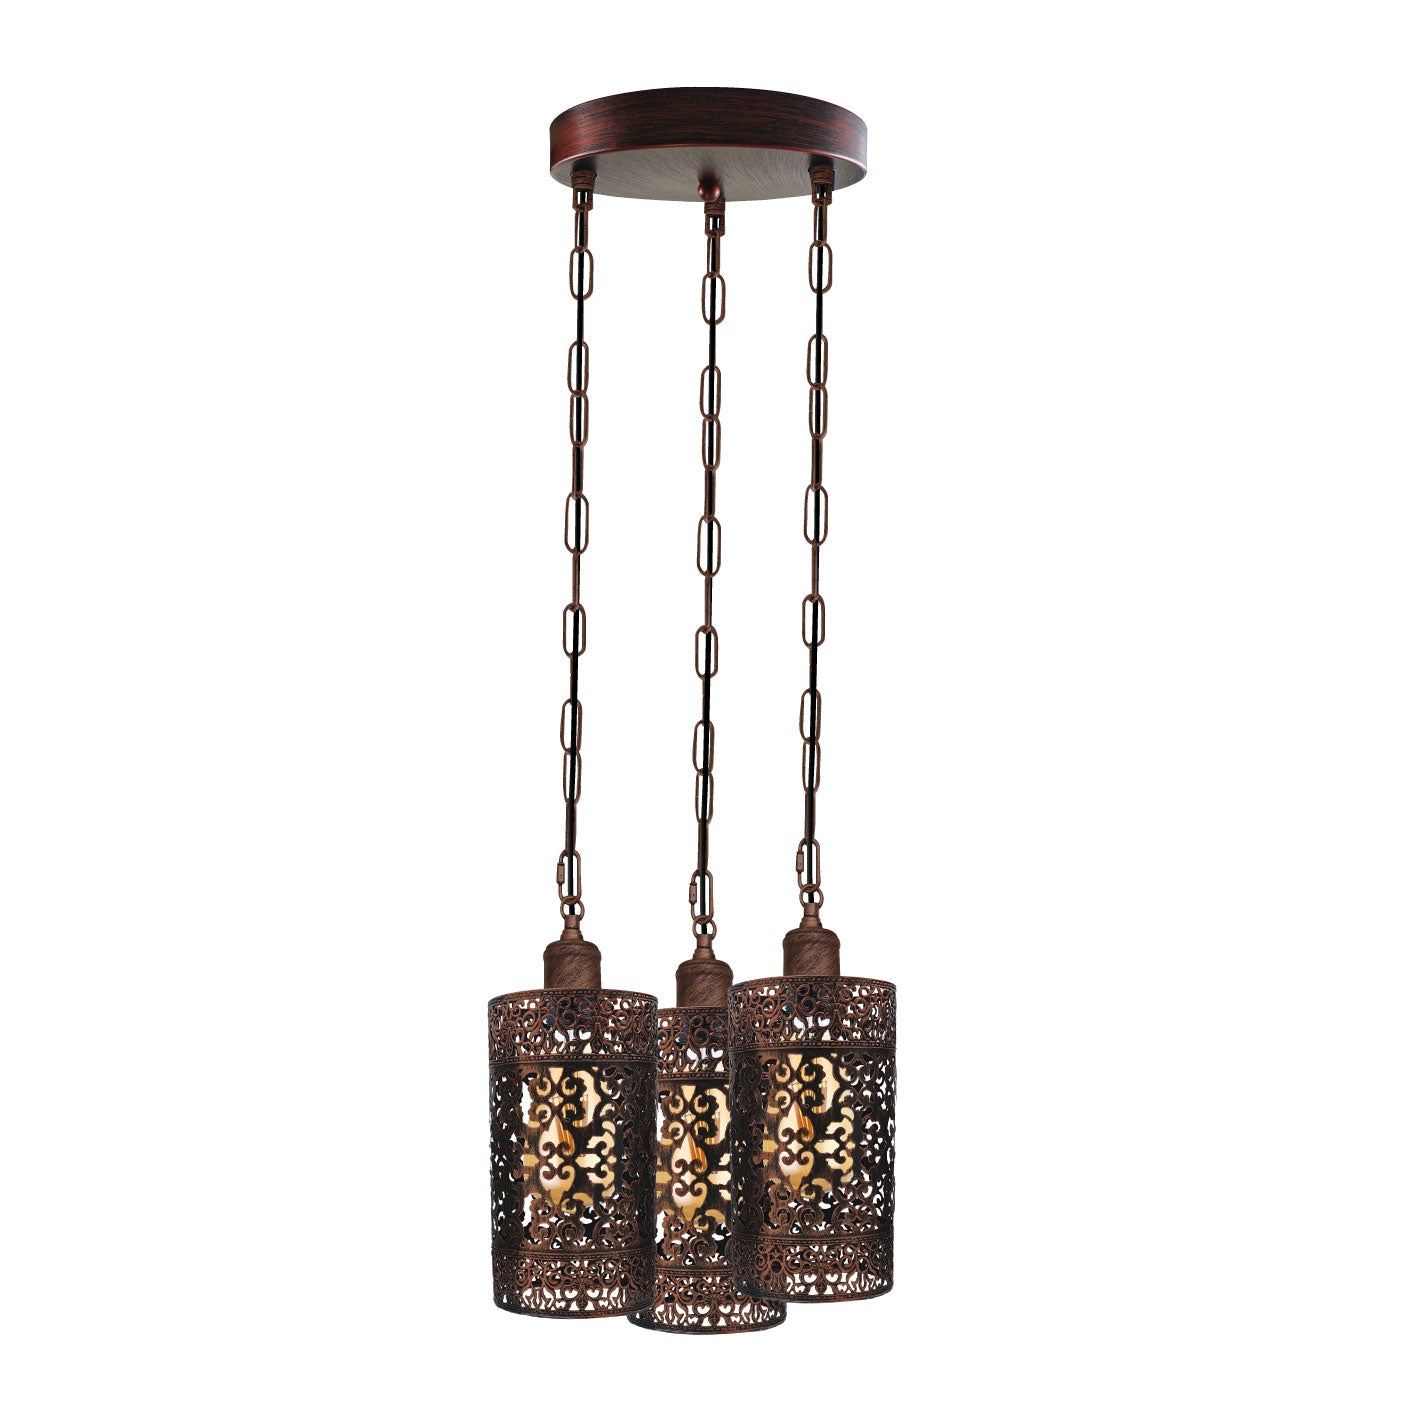 Industrial Retro pendant light 3-way Round ceiling base brushed finished Metal Ceiling Lamp Shade Pendant E27 lamp base for Home Living room Office Kitchen Restaurant